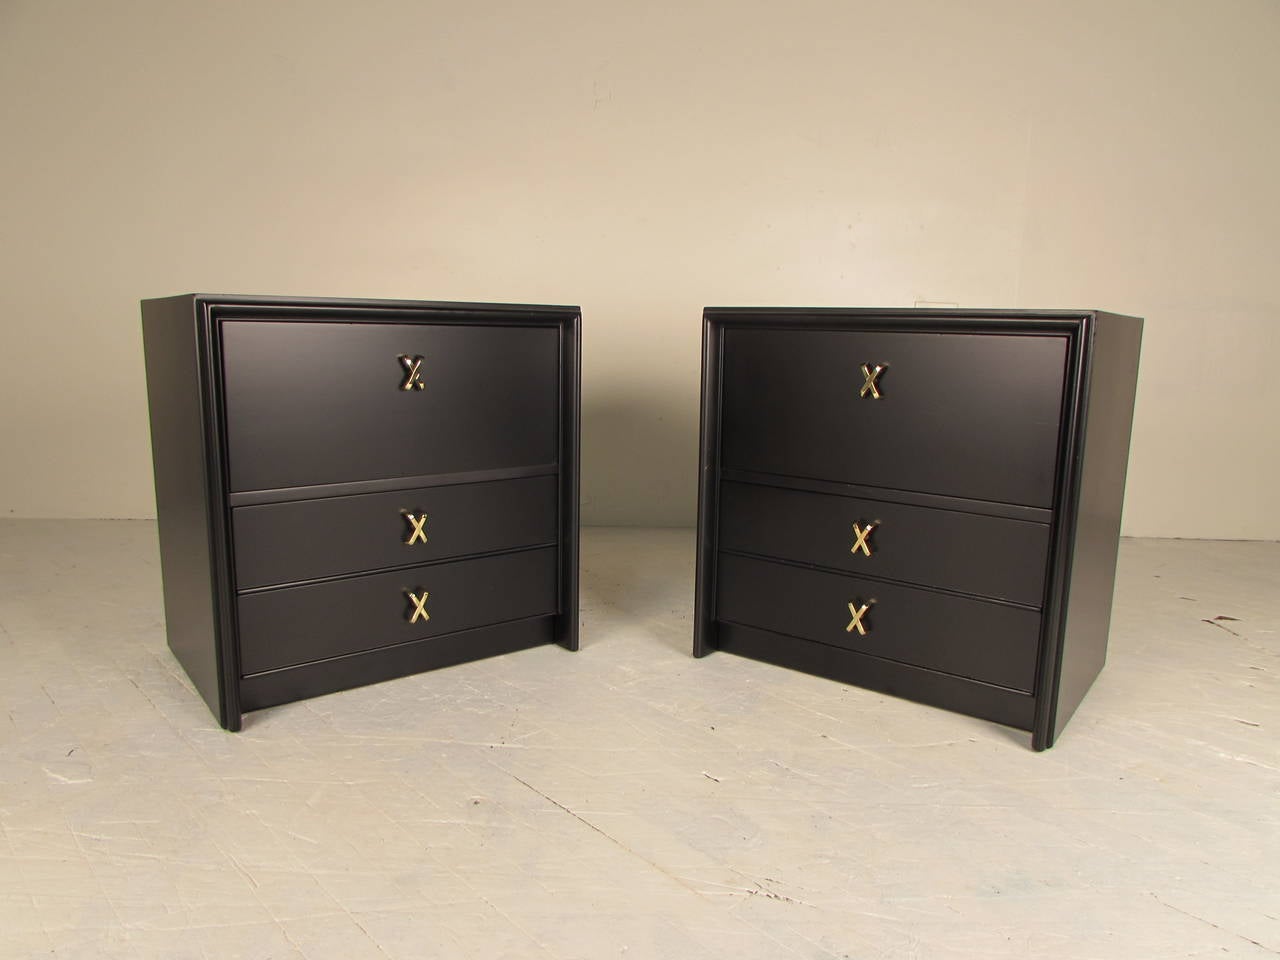 Completely refinished and utterly jaw-dropping in person! Pair of nightstands or small chests with 